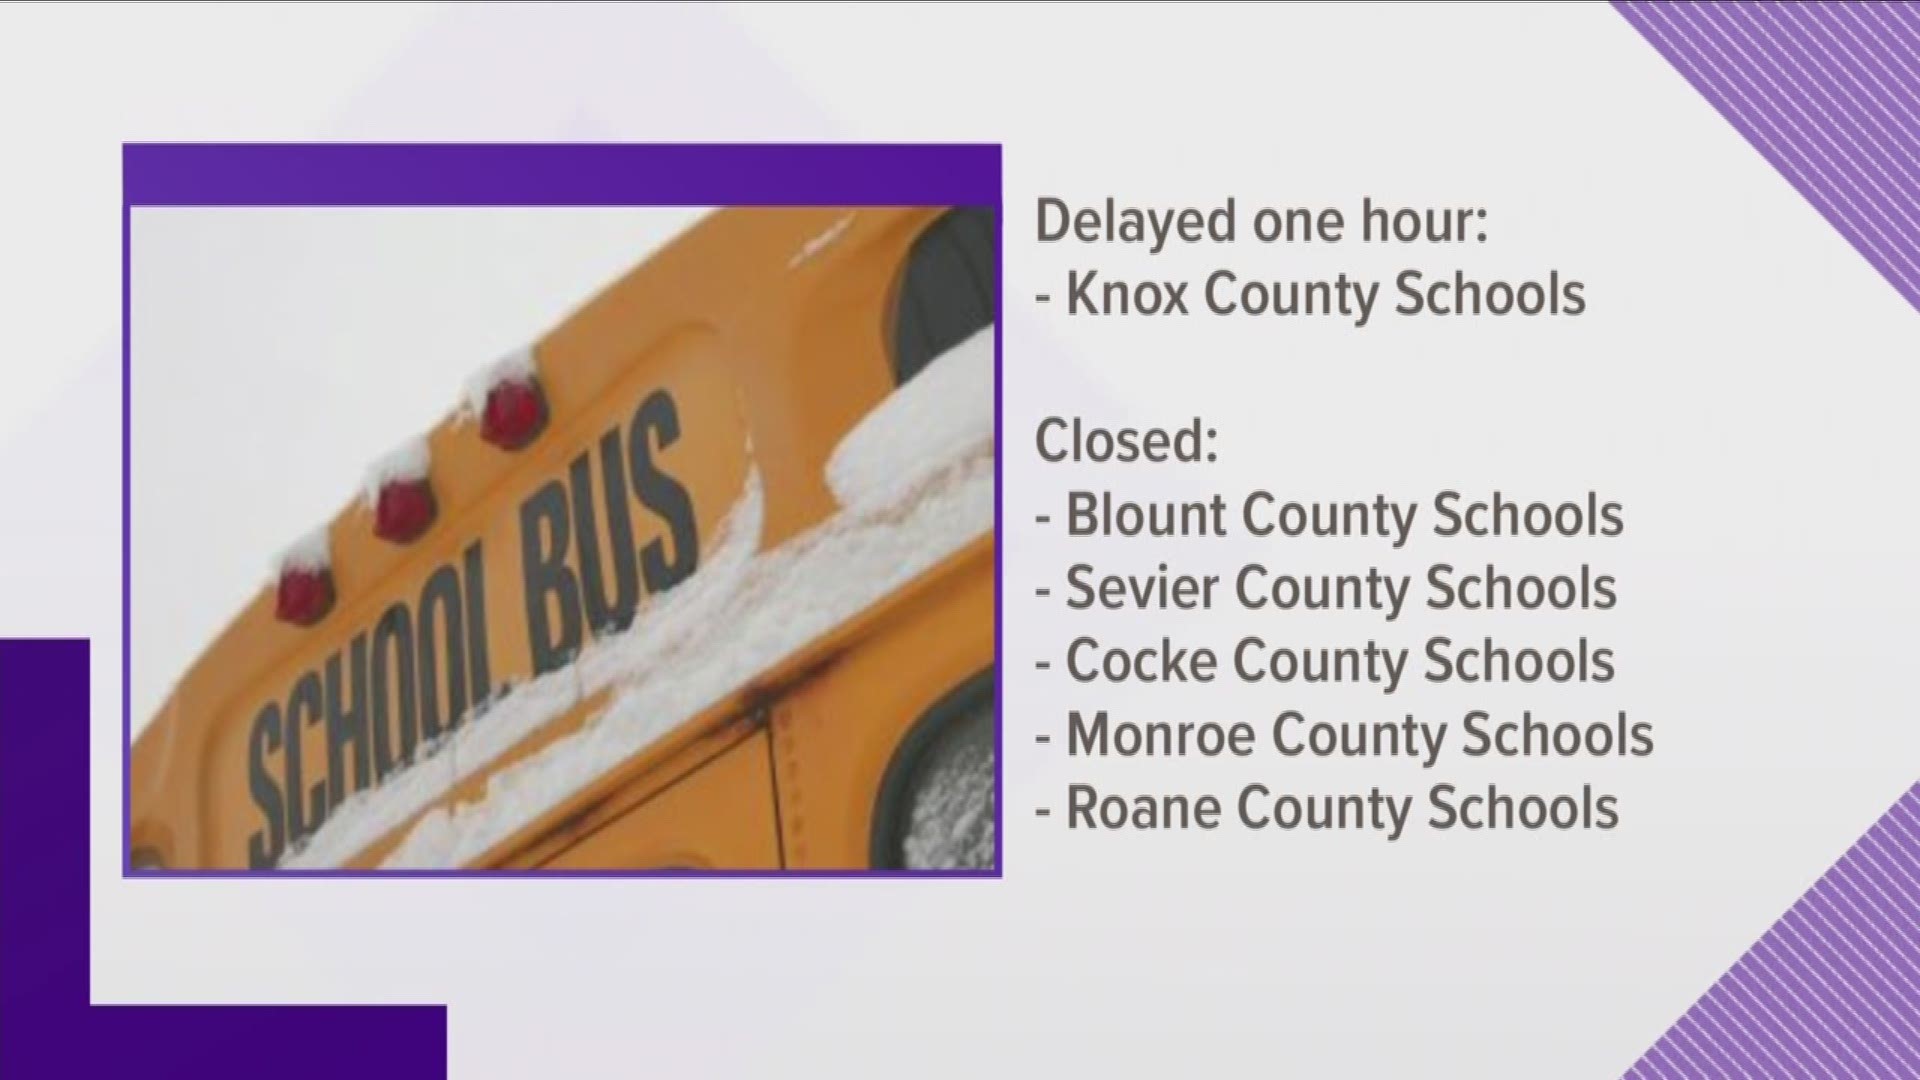 School closings for Tuesday, Jan. 29.